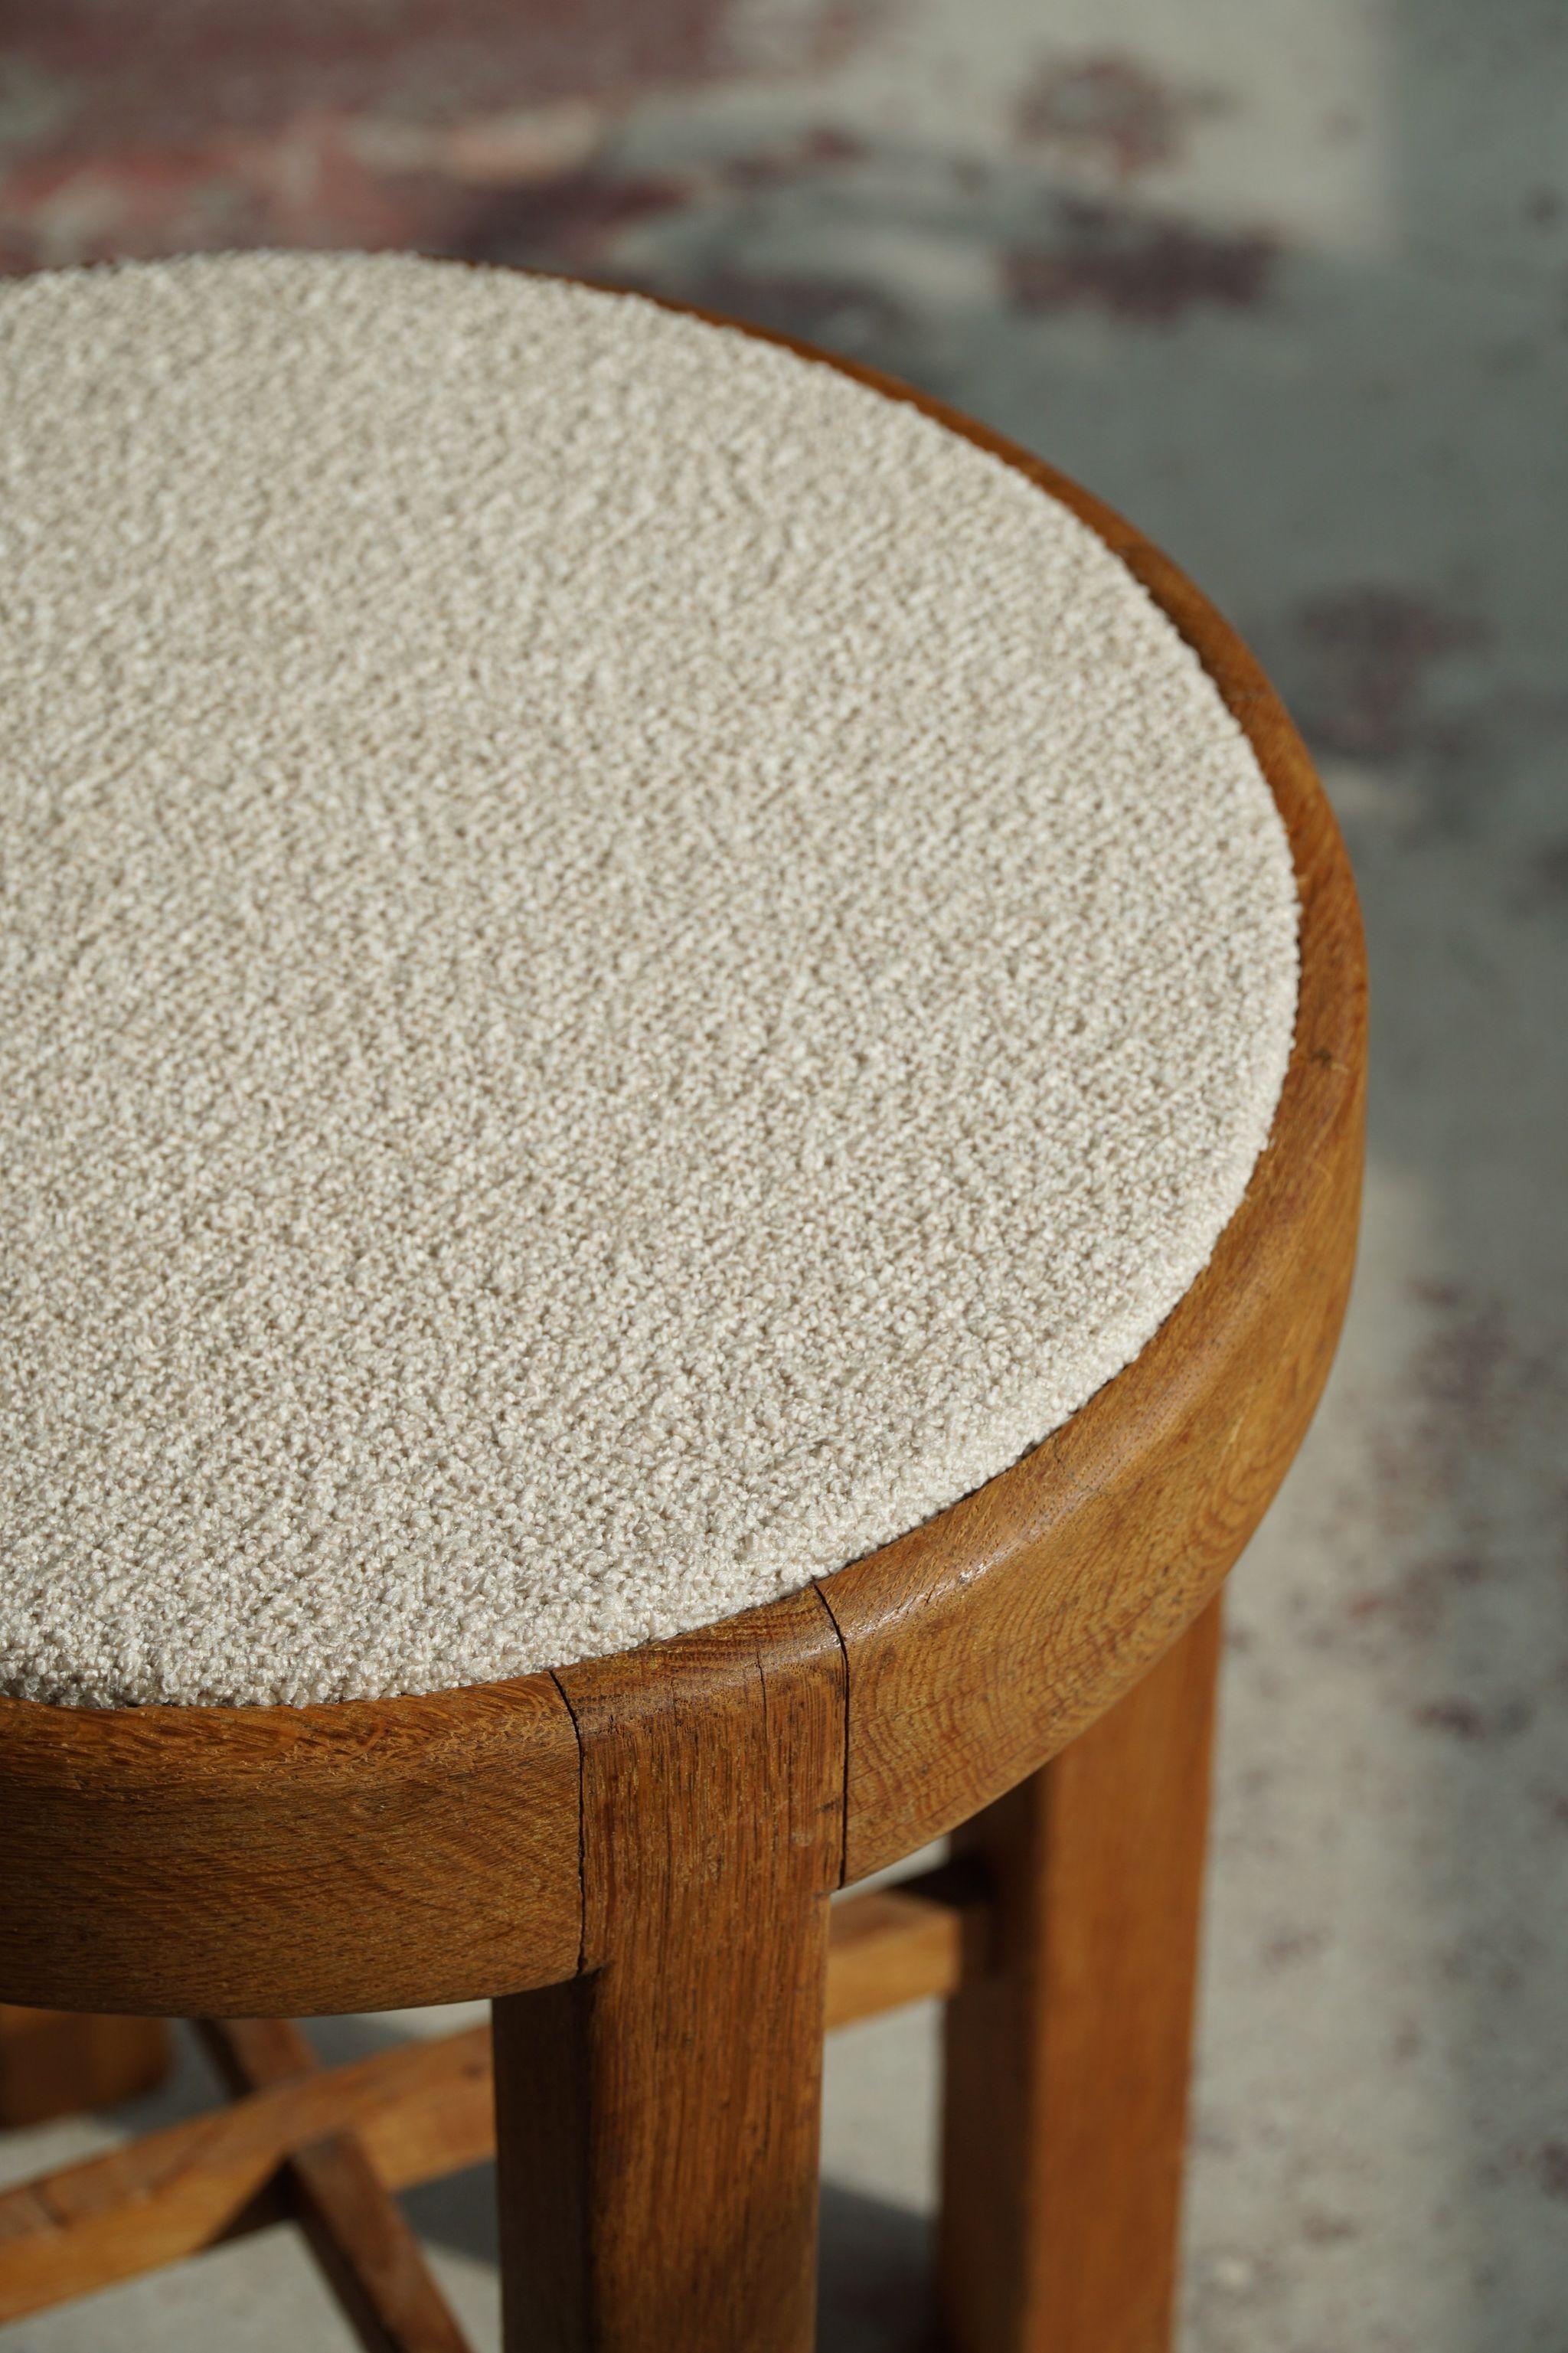 Danish Mid Century Stool in Oak and Reupholstered in Bouclé Wool, ca 1950s For Sale 5